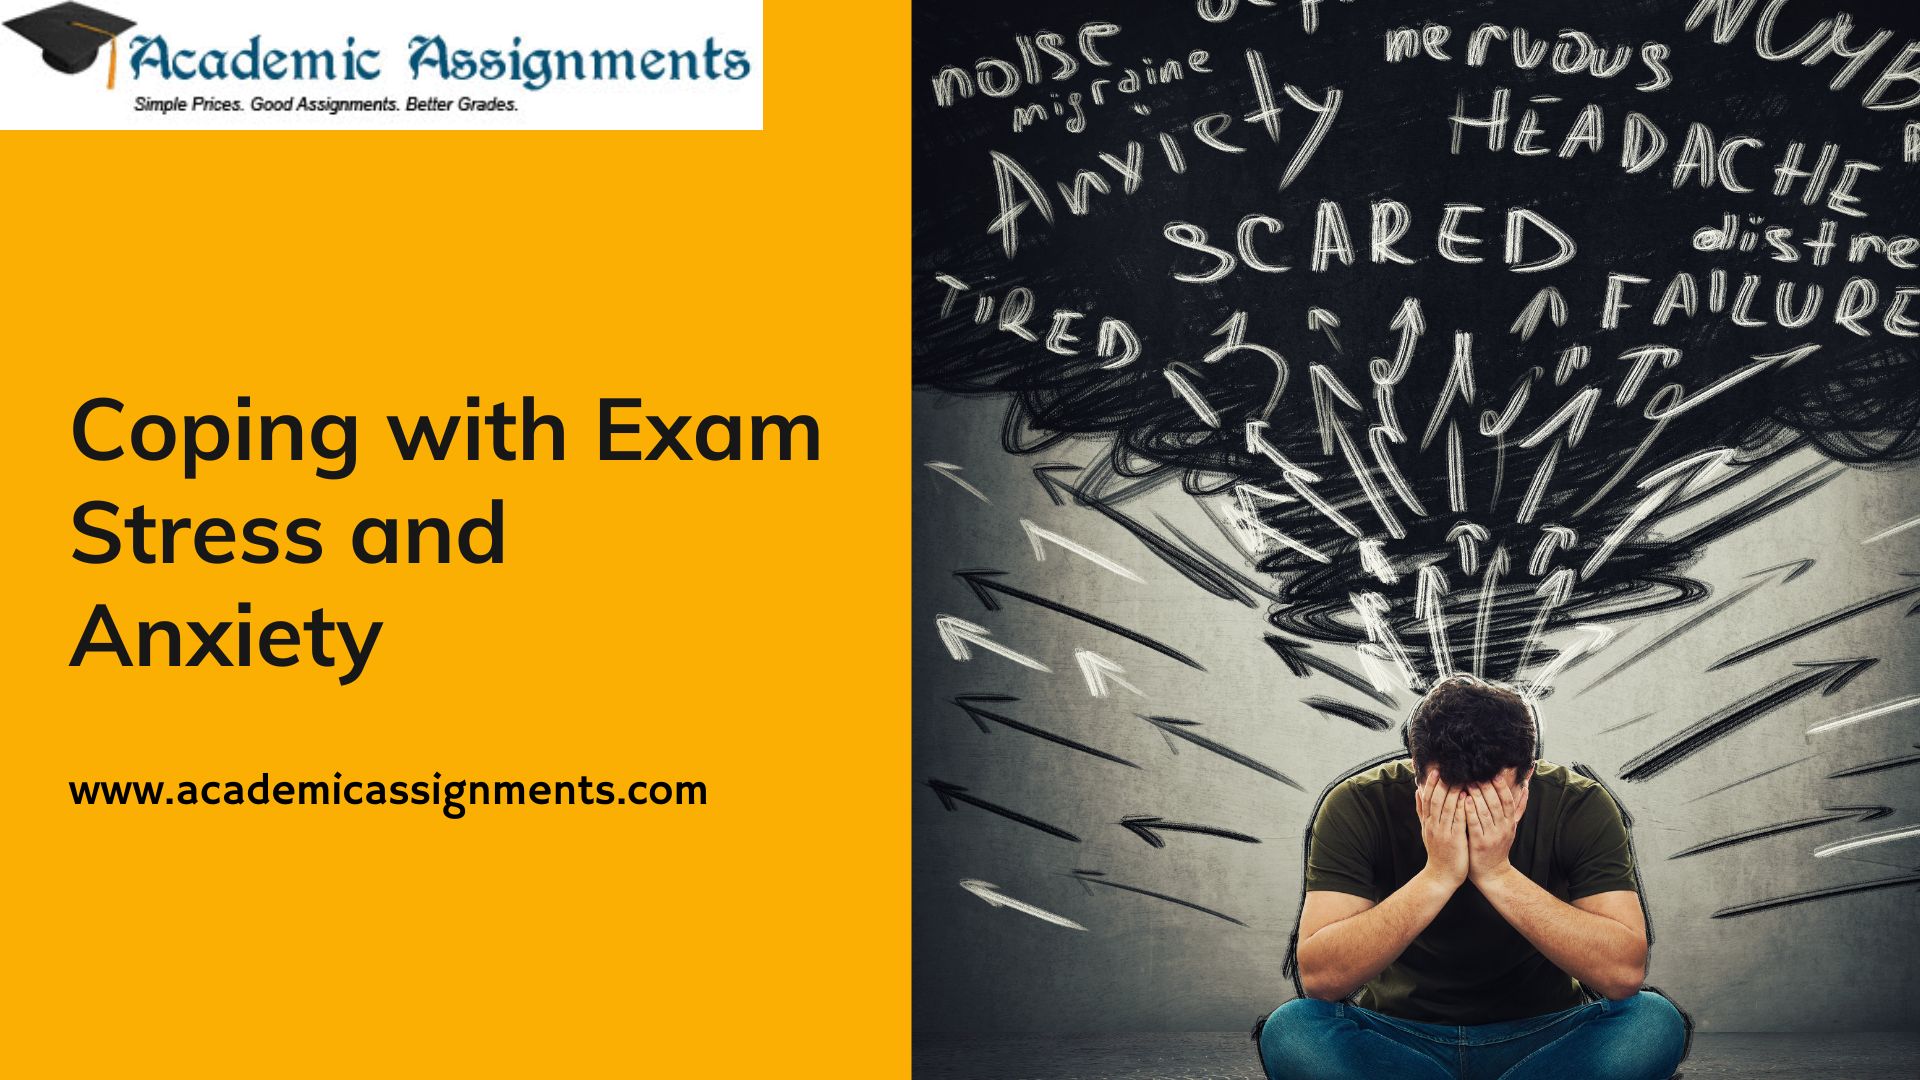 Coping with Exam Stress and Anxiety